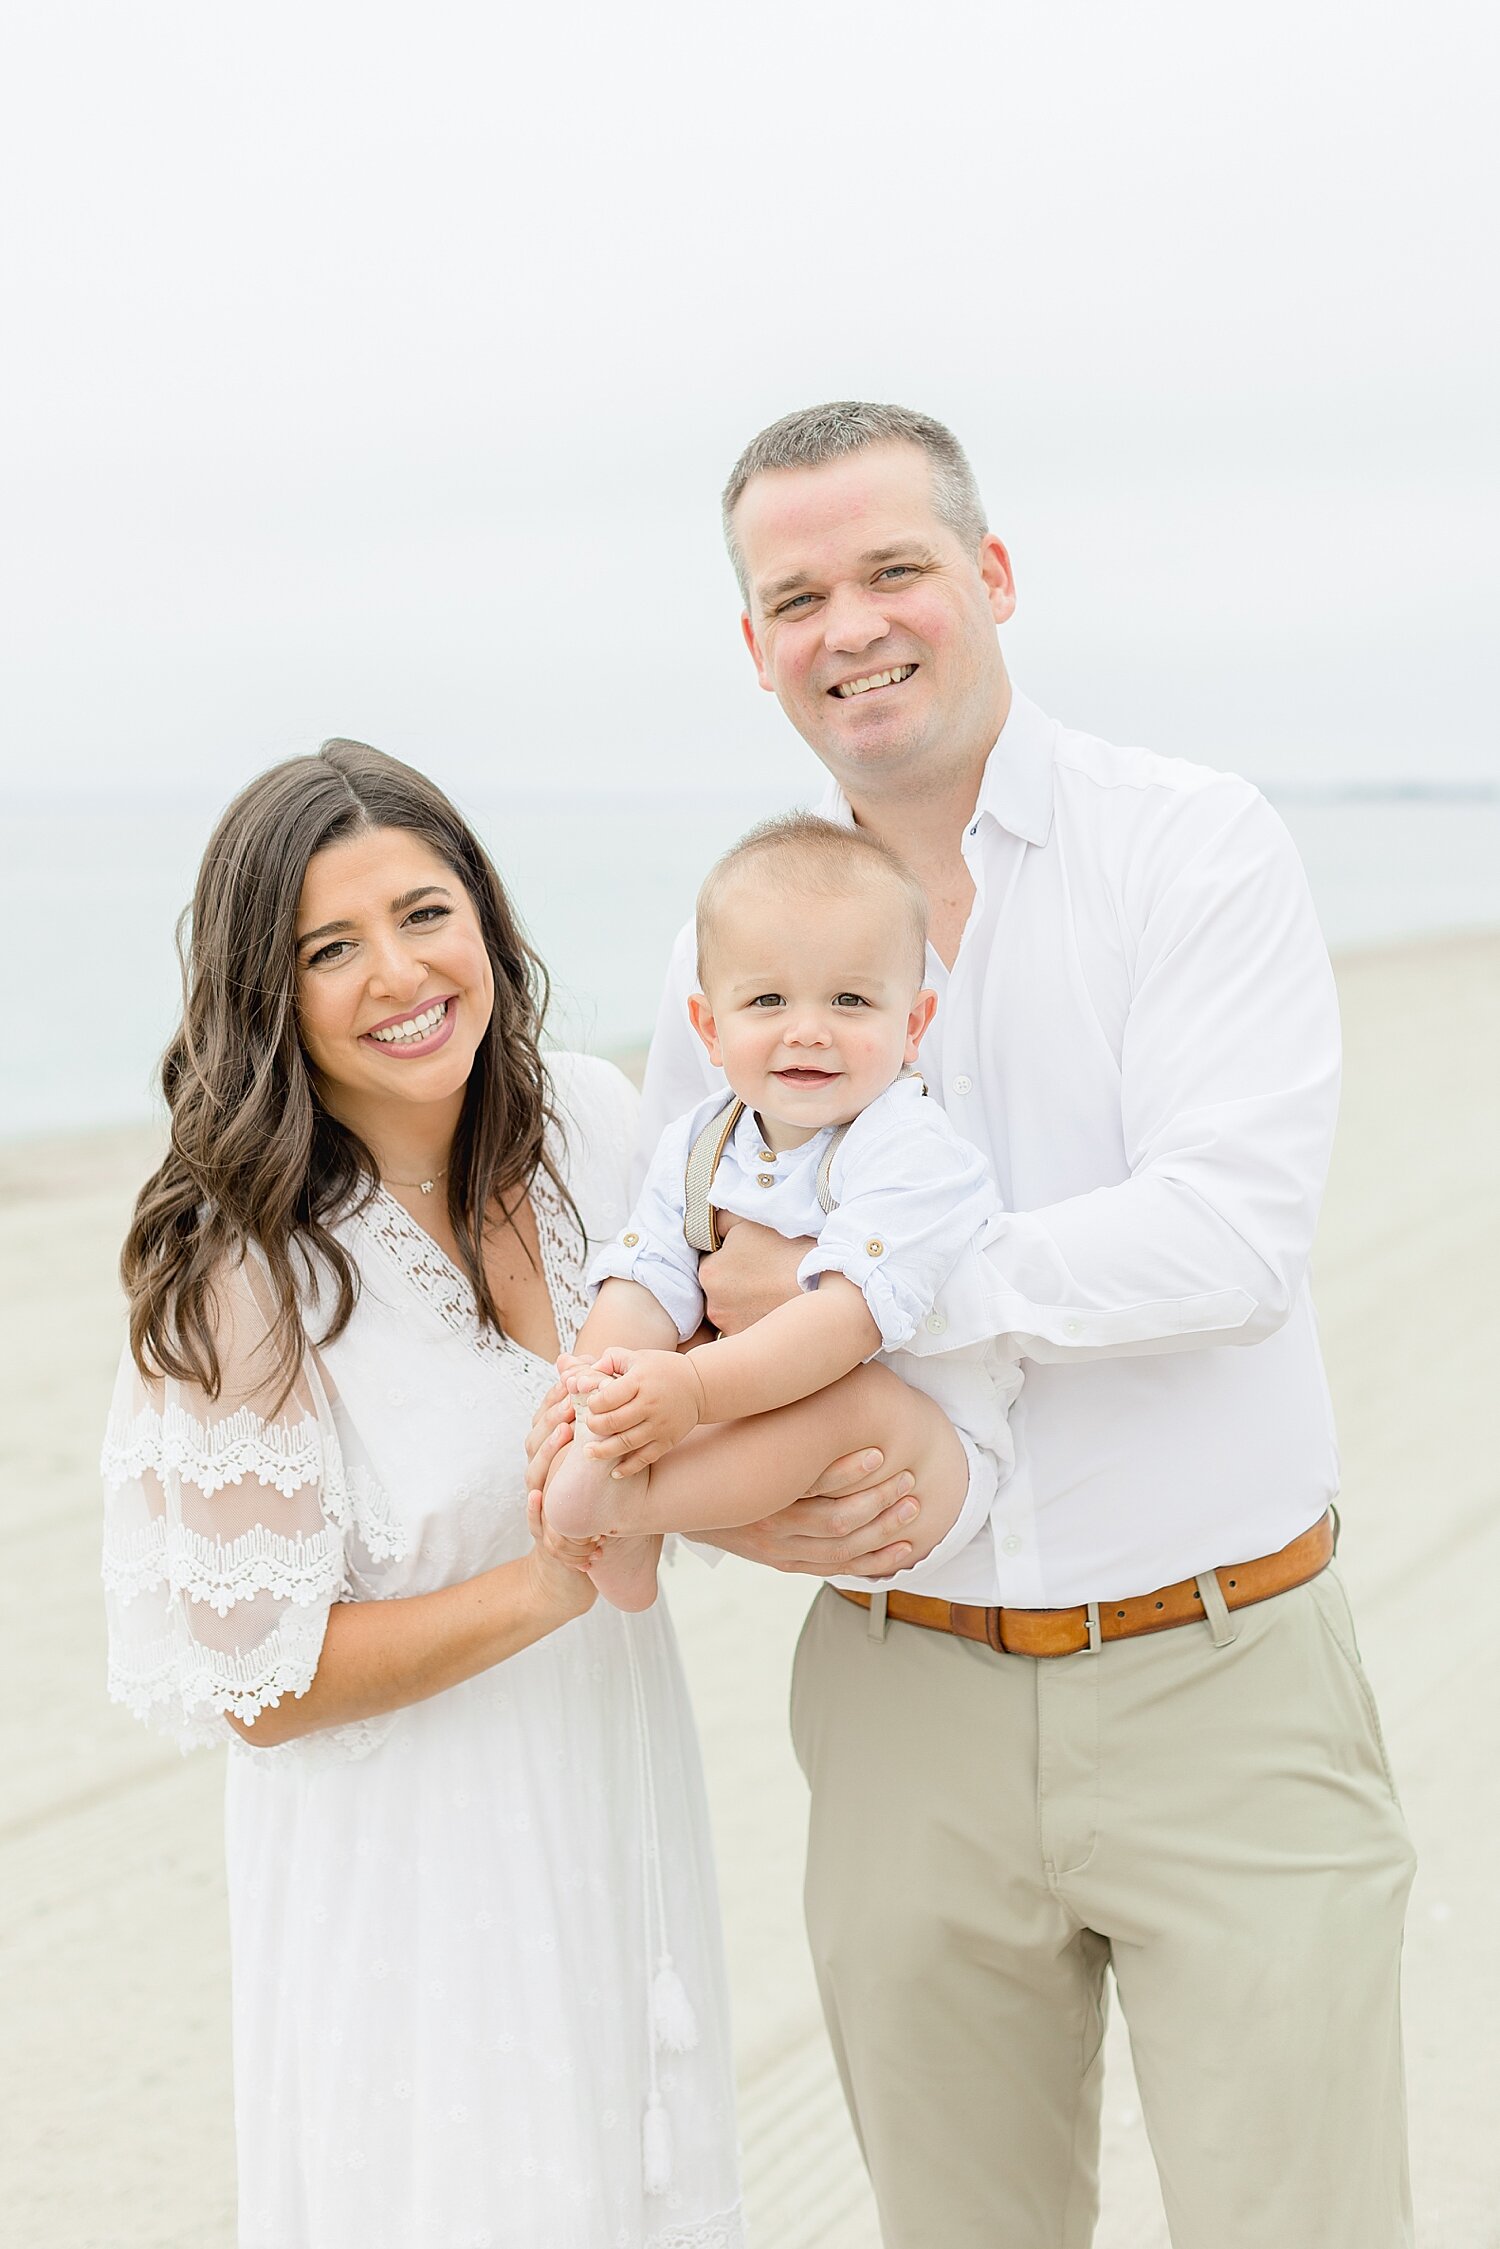 Family photos on the beach for sons first birthday | Kristin Wood Photography